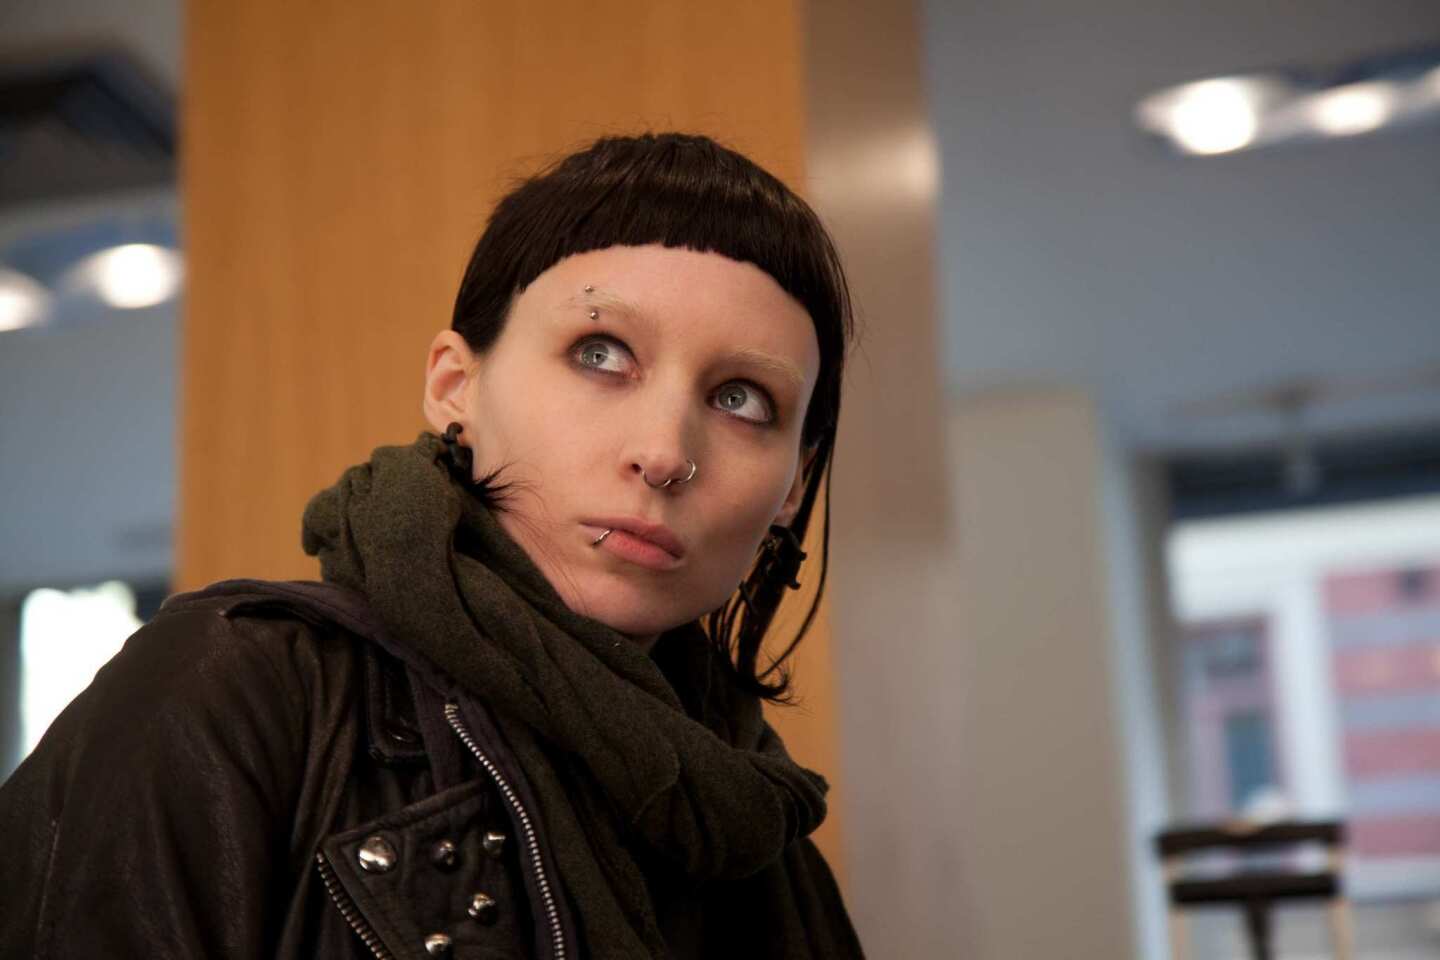 Rooney Mara's punked-out heroine Lisbeth Salander in "The Girl With the Dragon Tattoo" has influenced several fall 2012 collections.